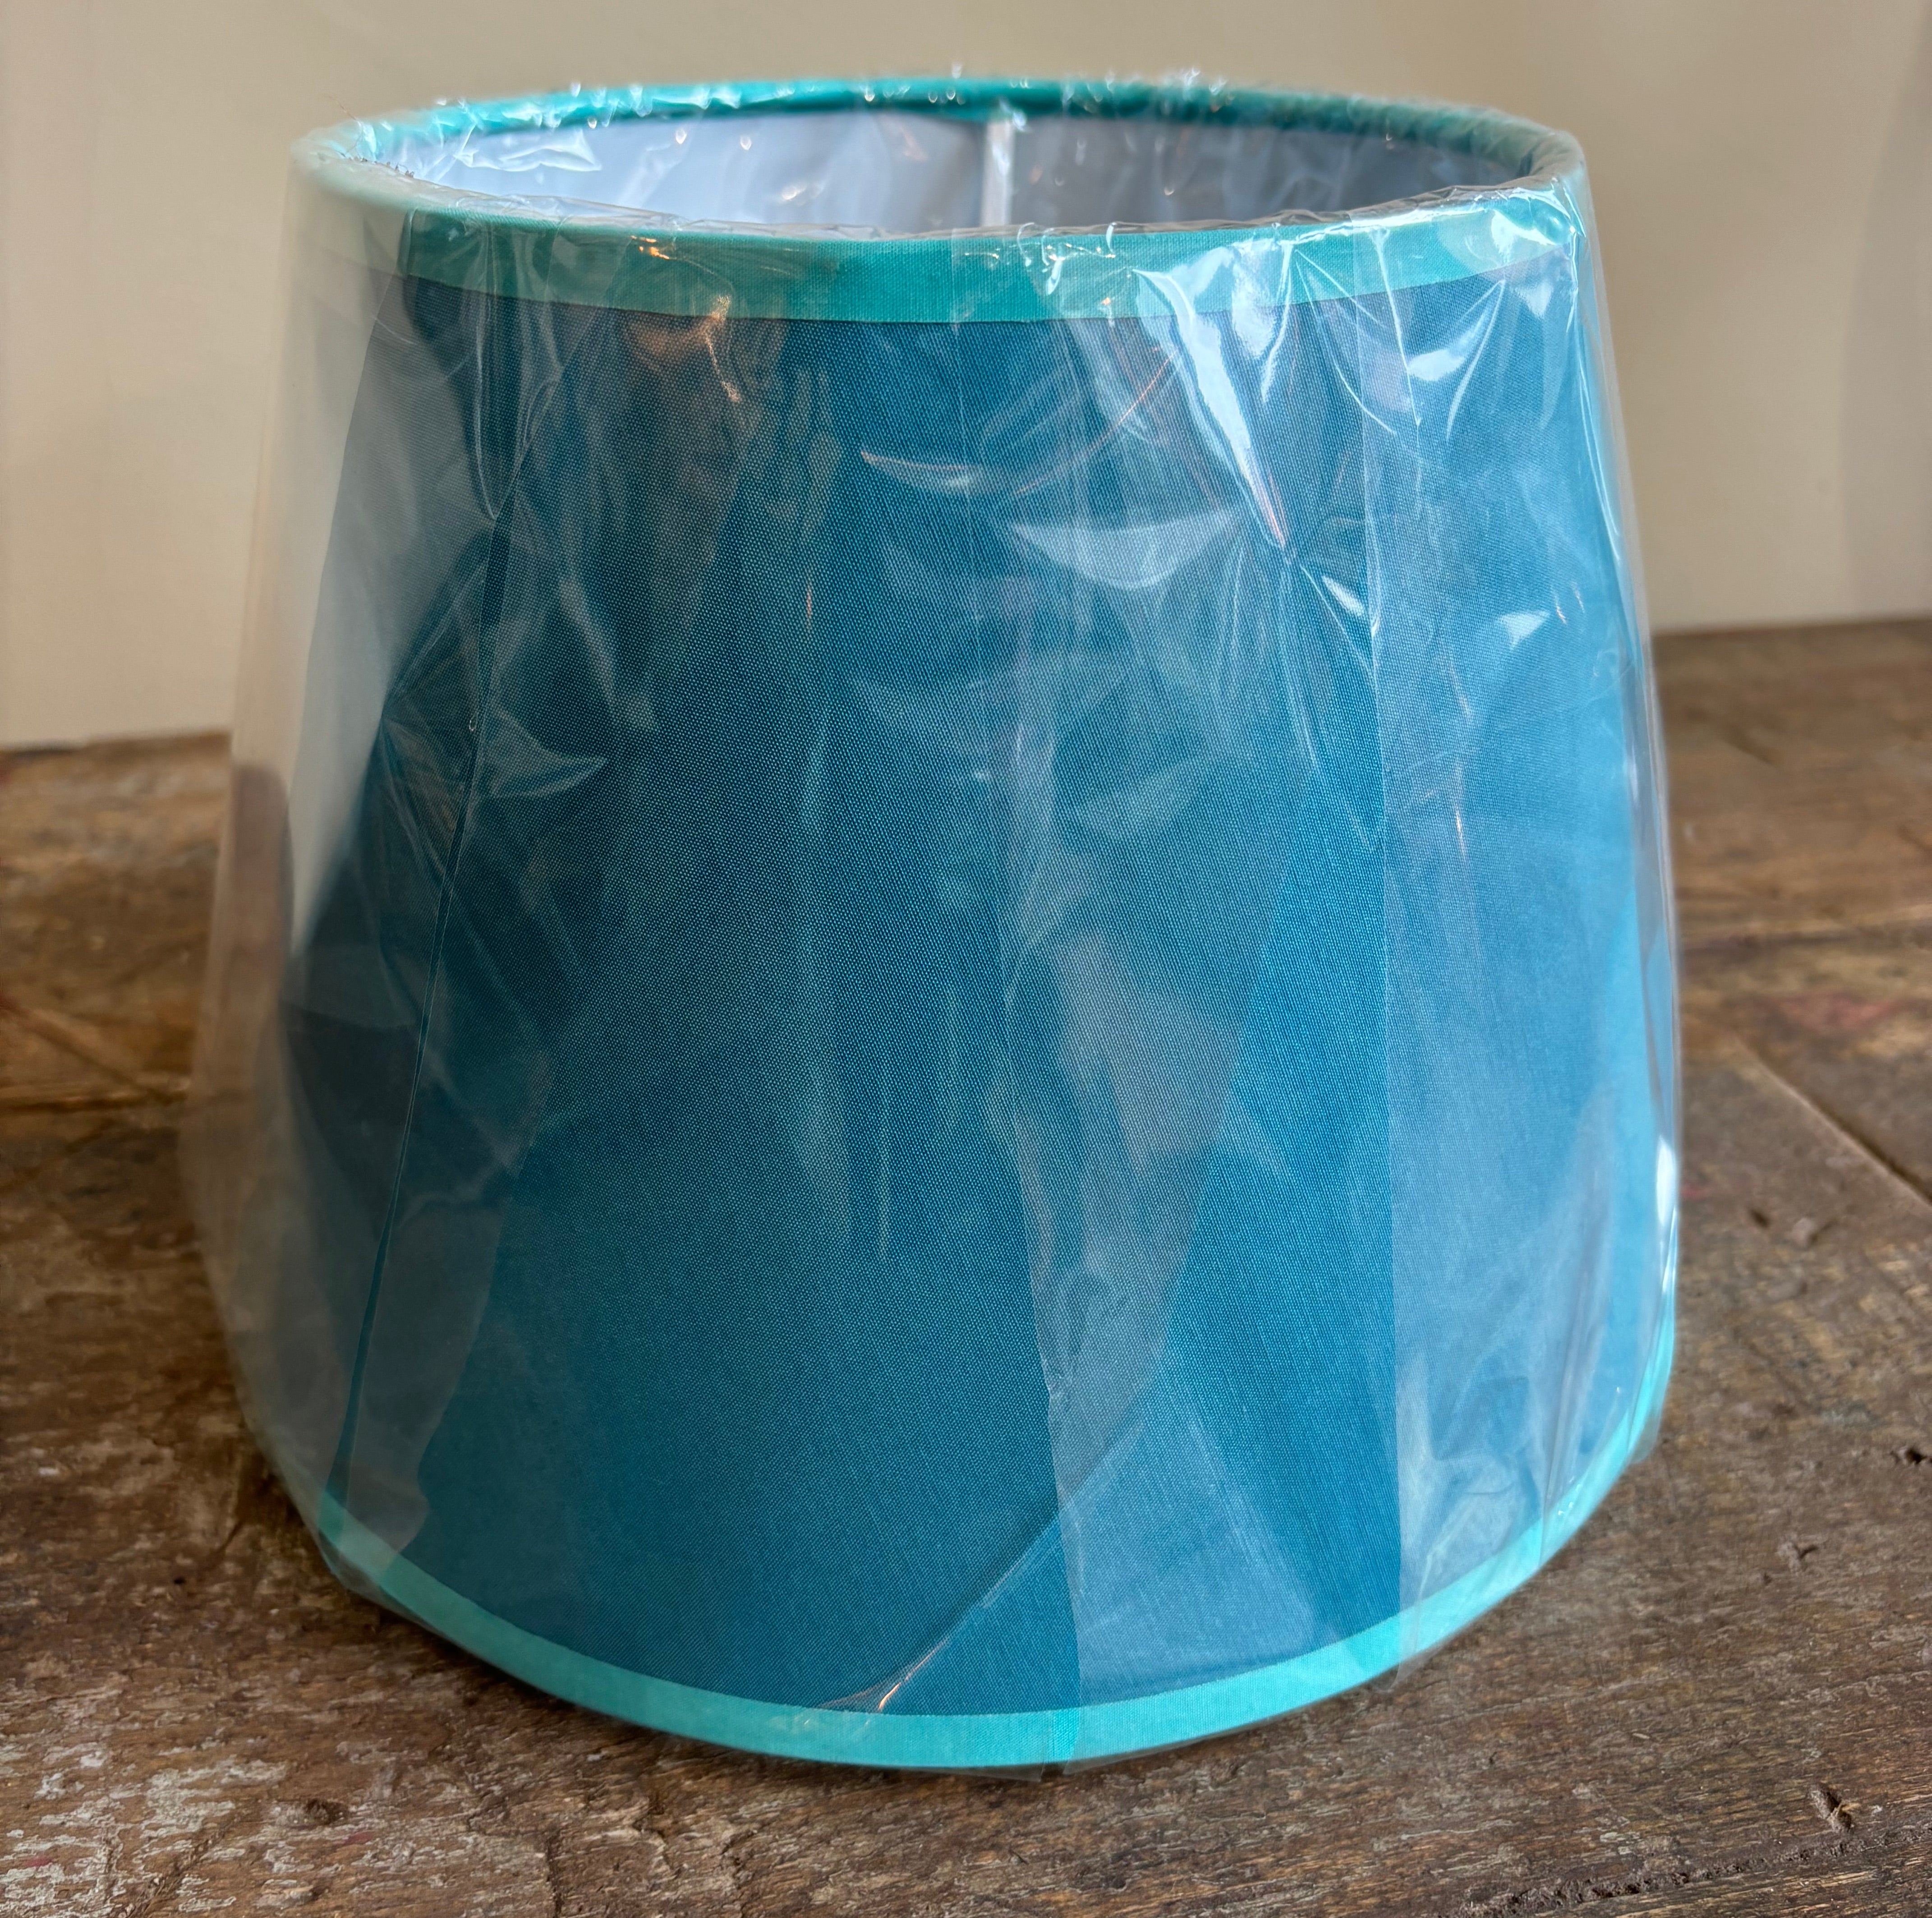 REDUCED retro teal/turquoise lampshade for lamp